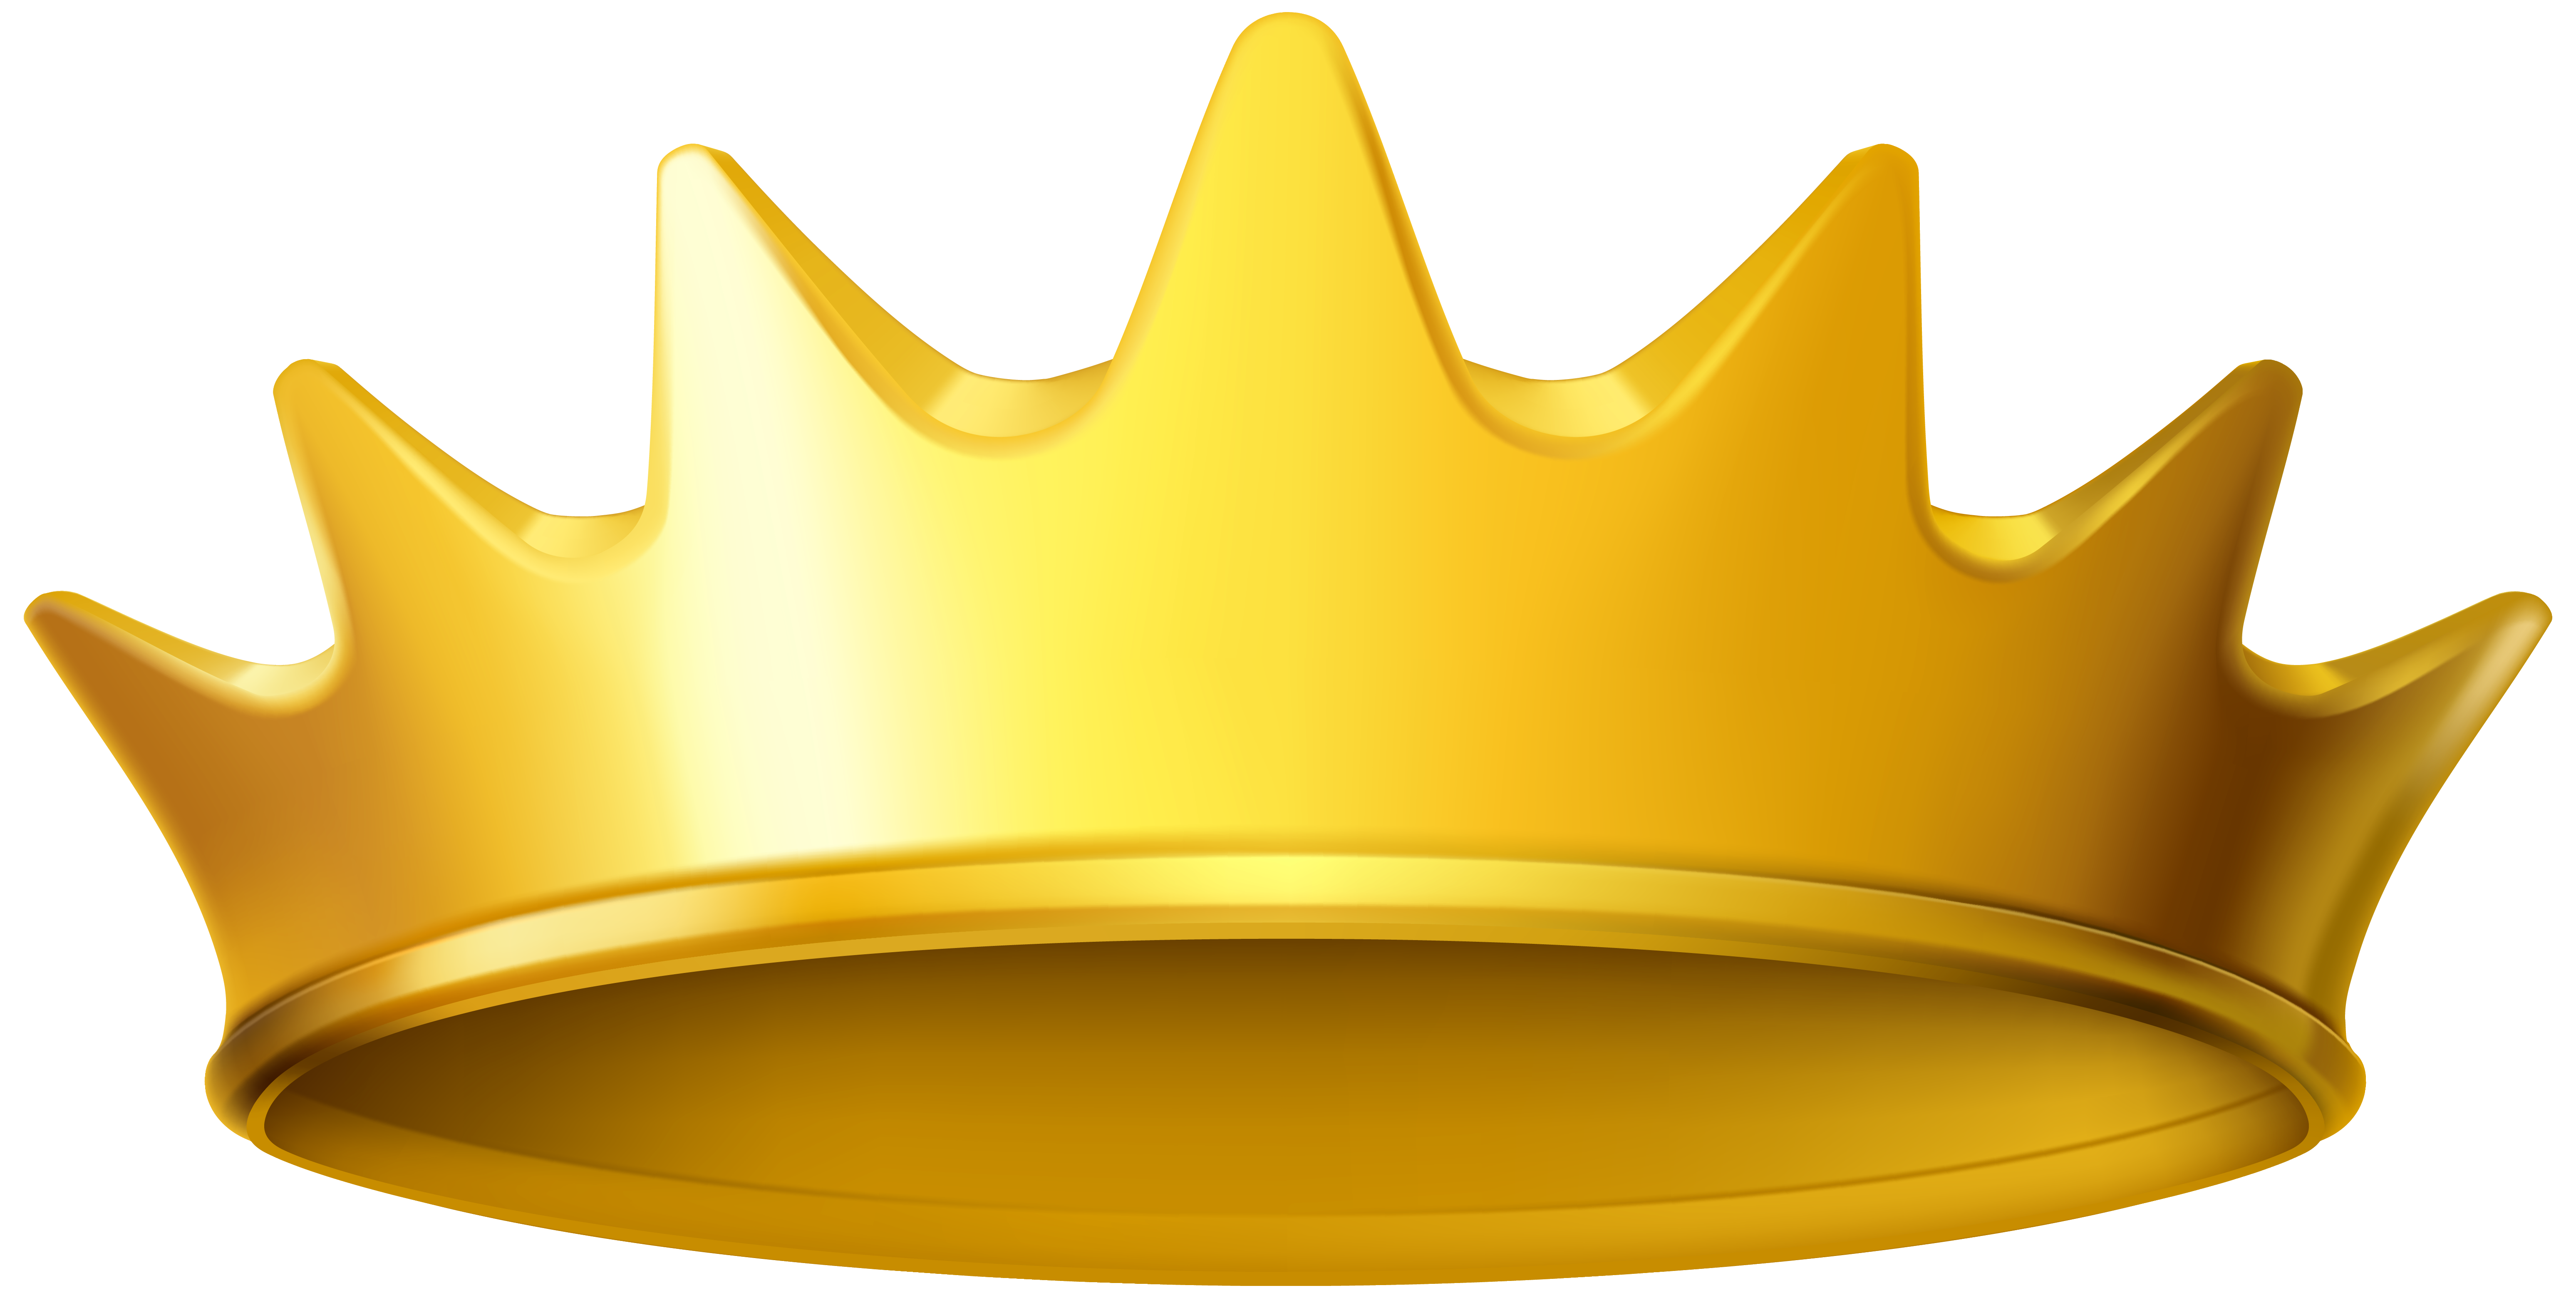 Crown image transparent clipartxtras. Crowns clipart girly